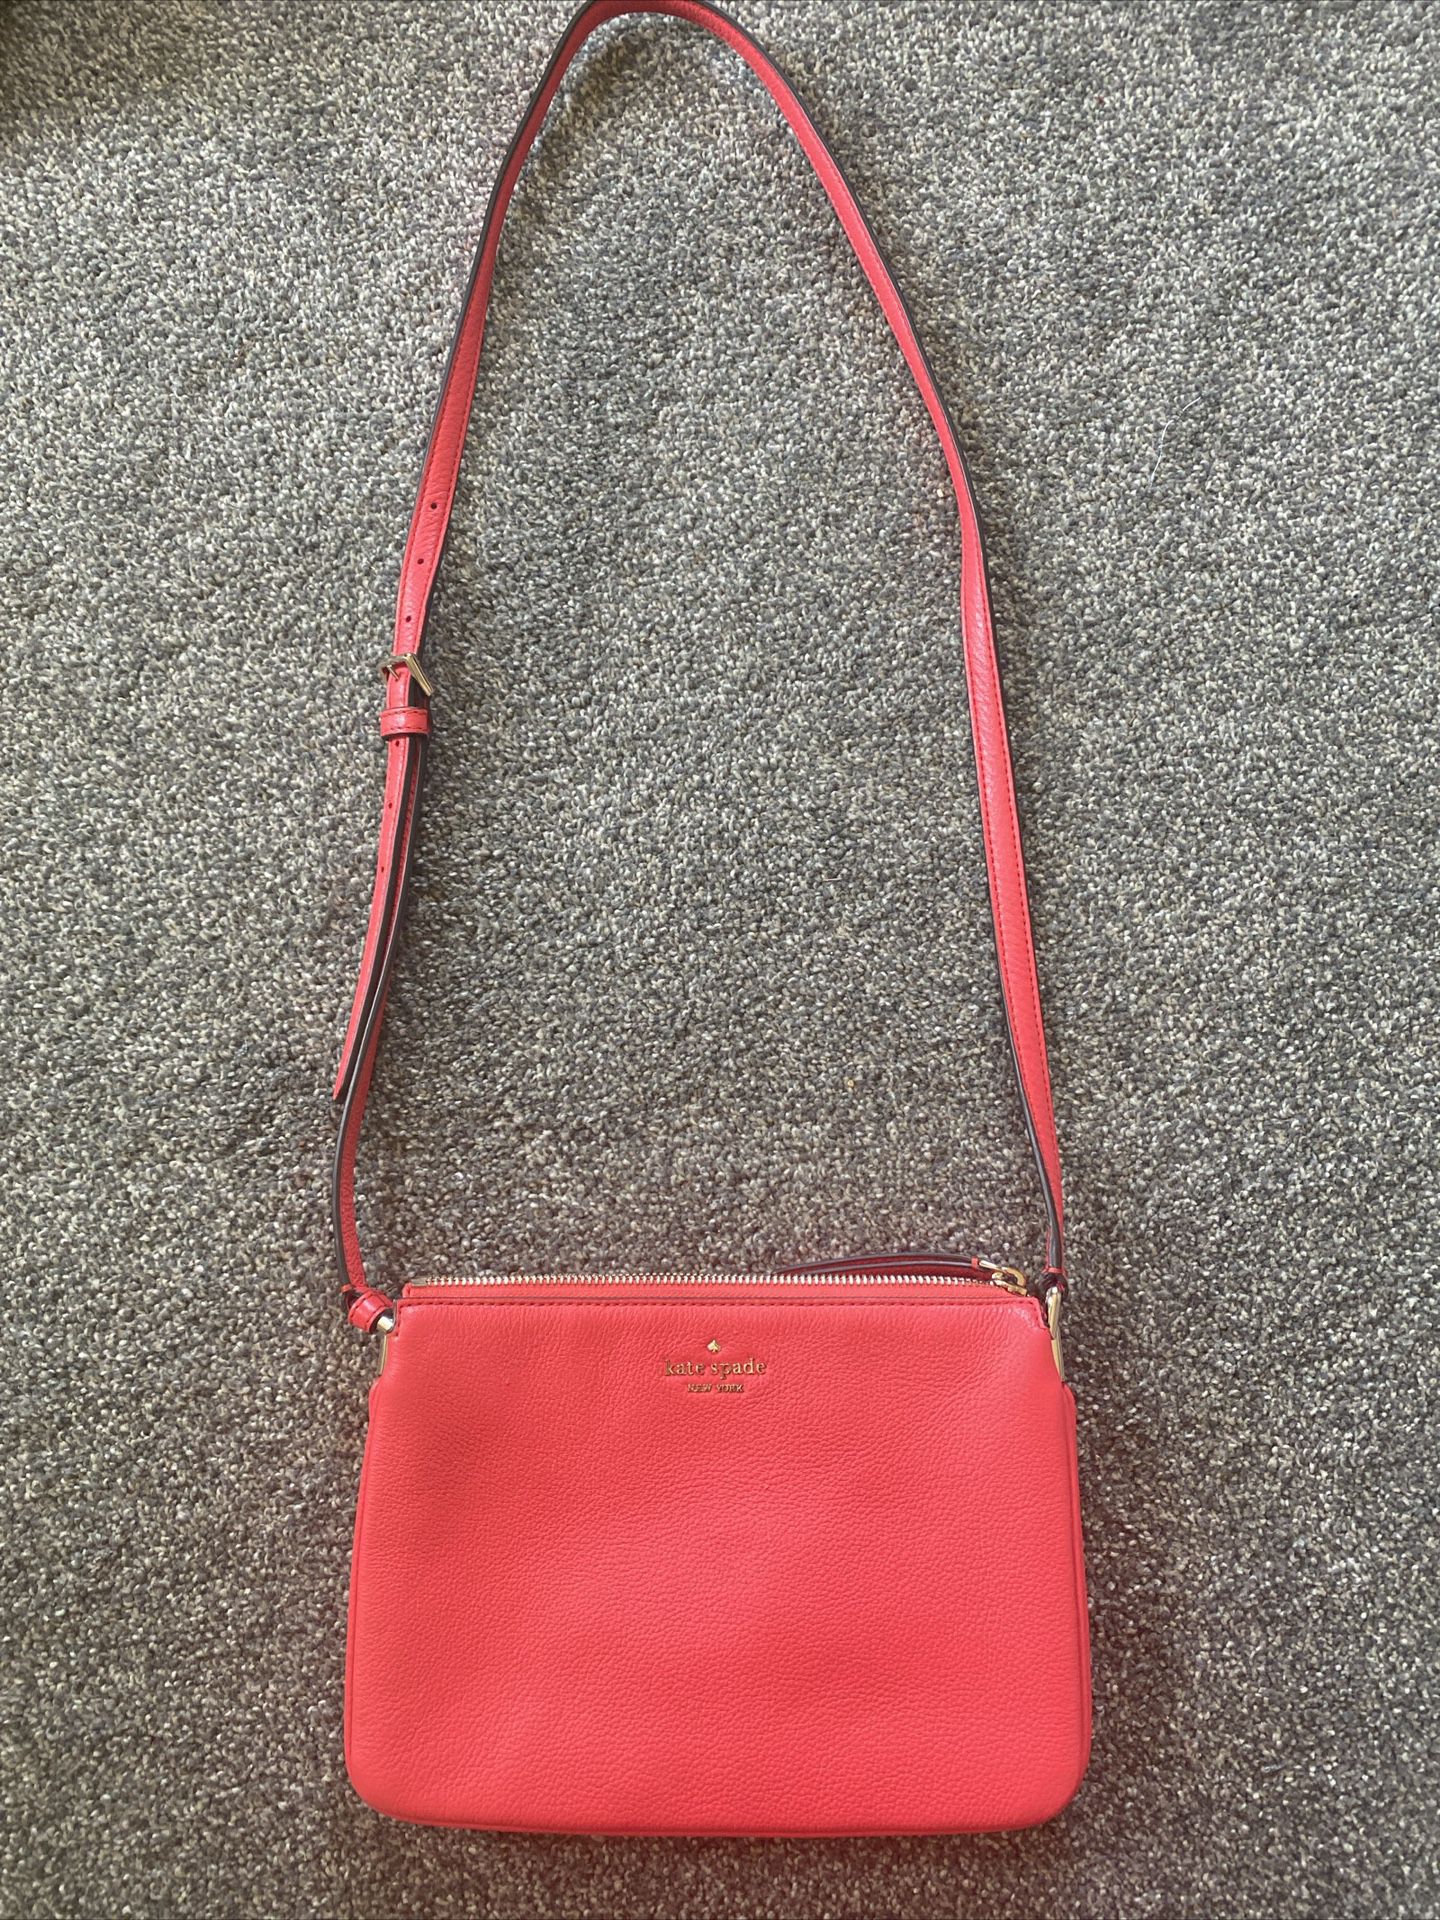 NEW/NEVER USED Kate Spade Bailey Pebble Leather Crossbody Bag Candied Cherry Red K4651 RP: $299